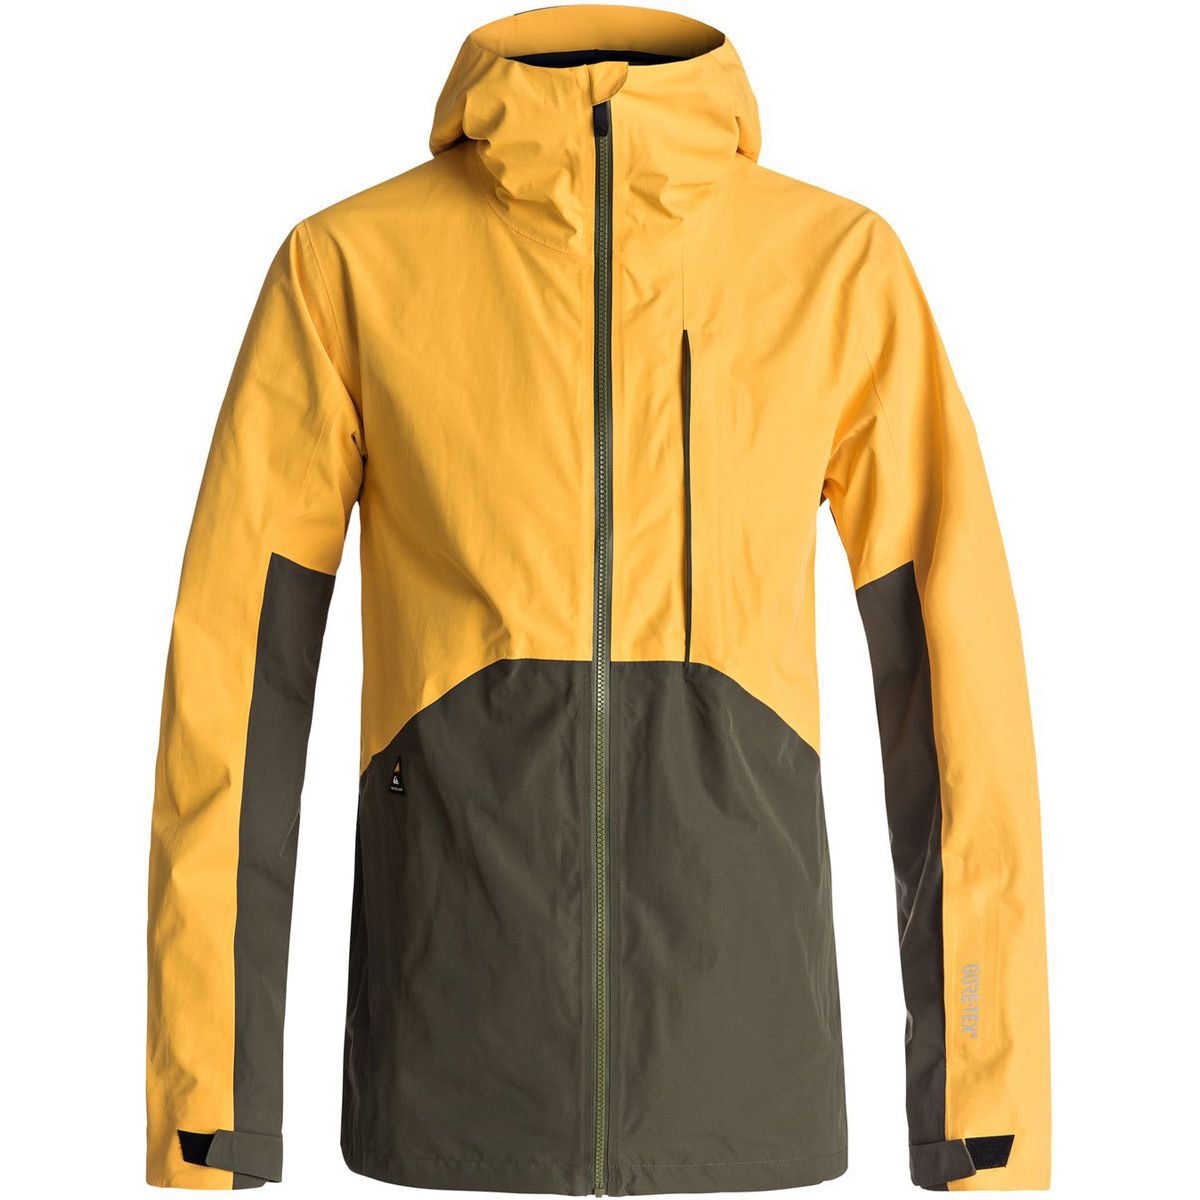 Quiksilver Forever 2L Gore-Tex Hooded Jacket - Men's | Backcountry.com